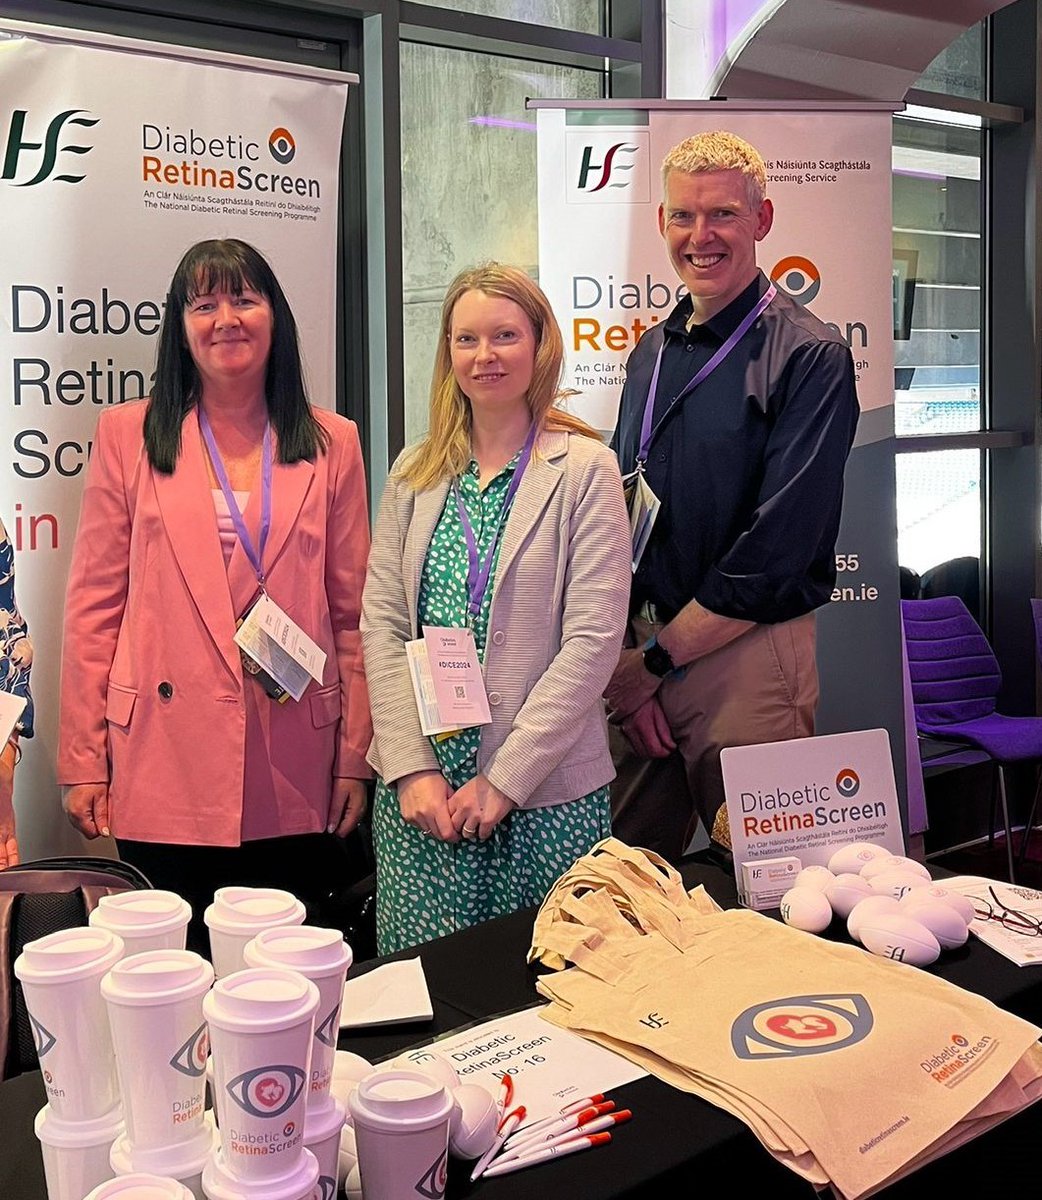 Today we're attending the #Diabetes in Ireland Conference #DICE2024 in @CrokePark. Drop by our information stand to meet our #DiabeticRetinaScreen team and get all the information you need about #screening for #retinopathy in people with Type 1 or 2 diabetes. #ChooseScreening